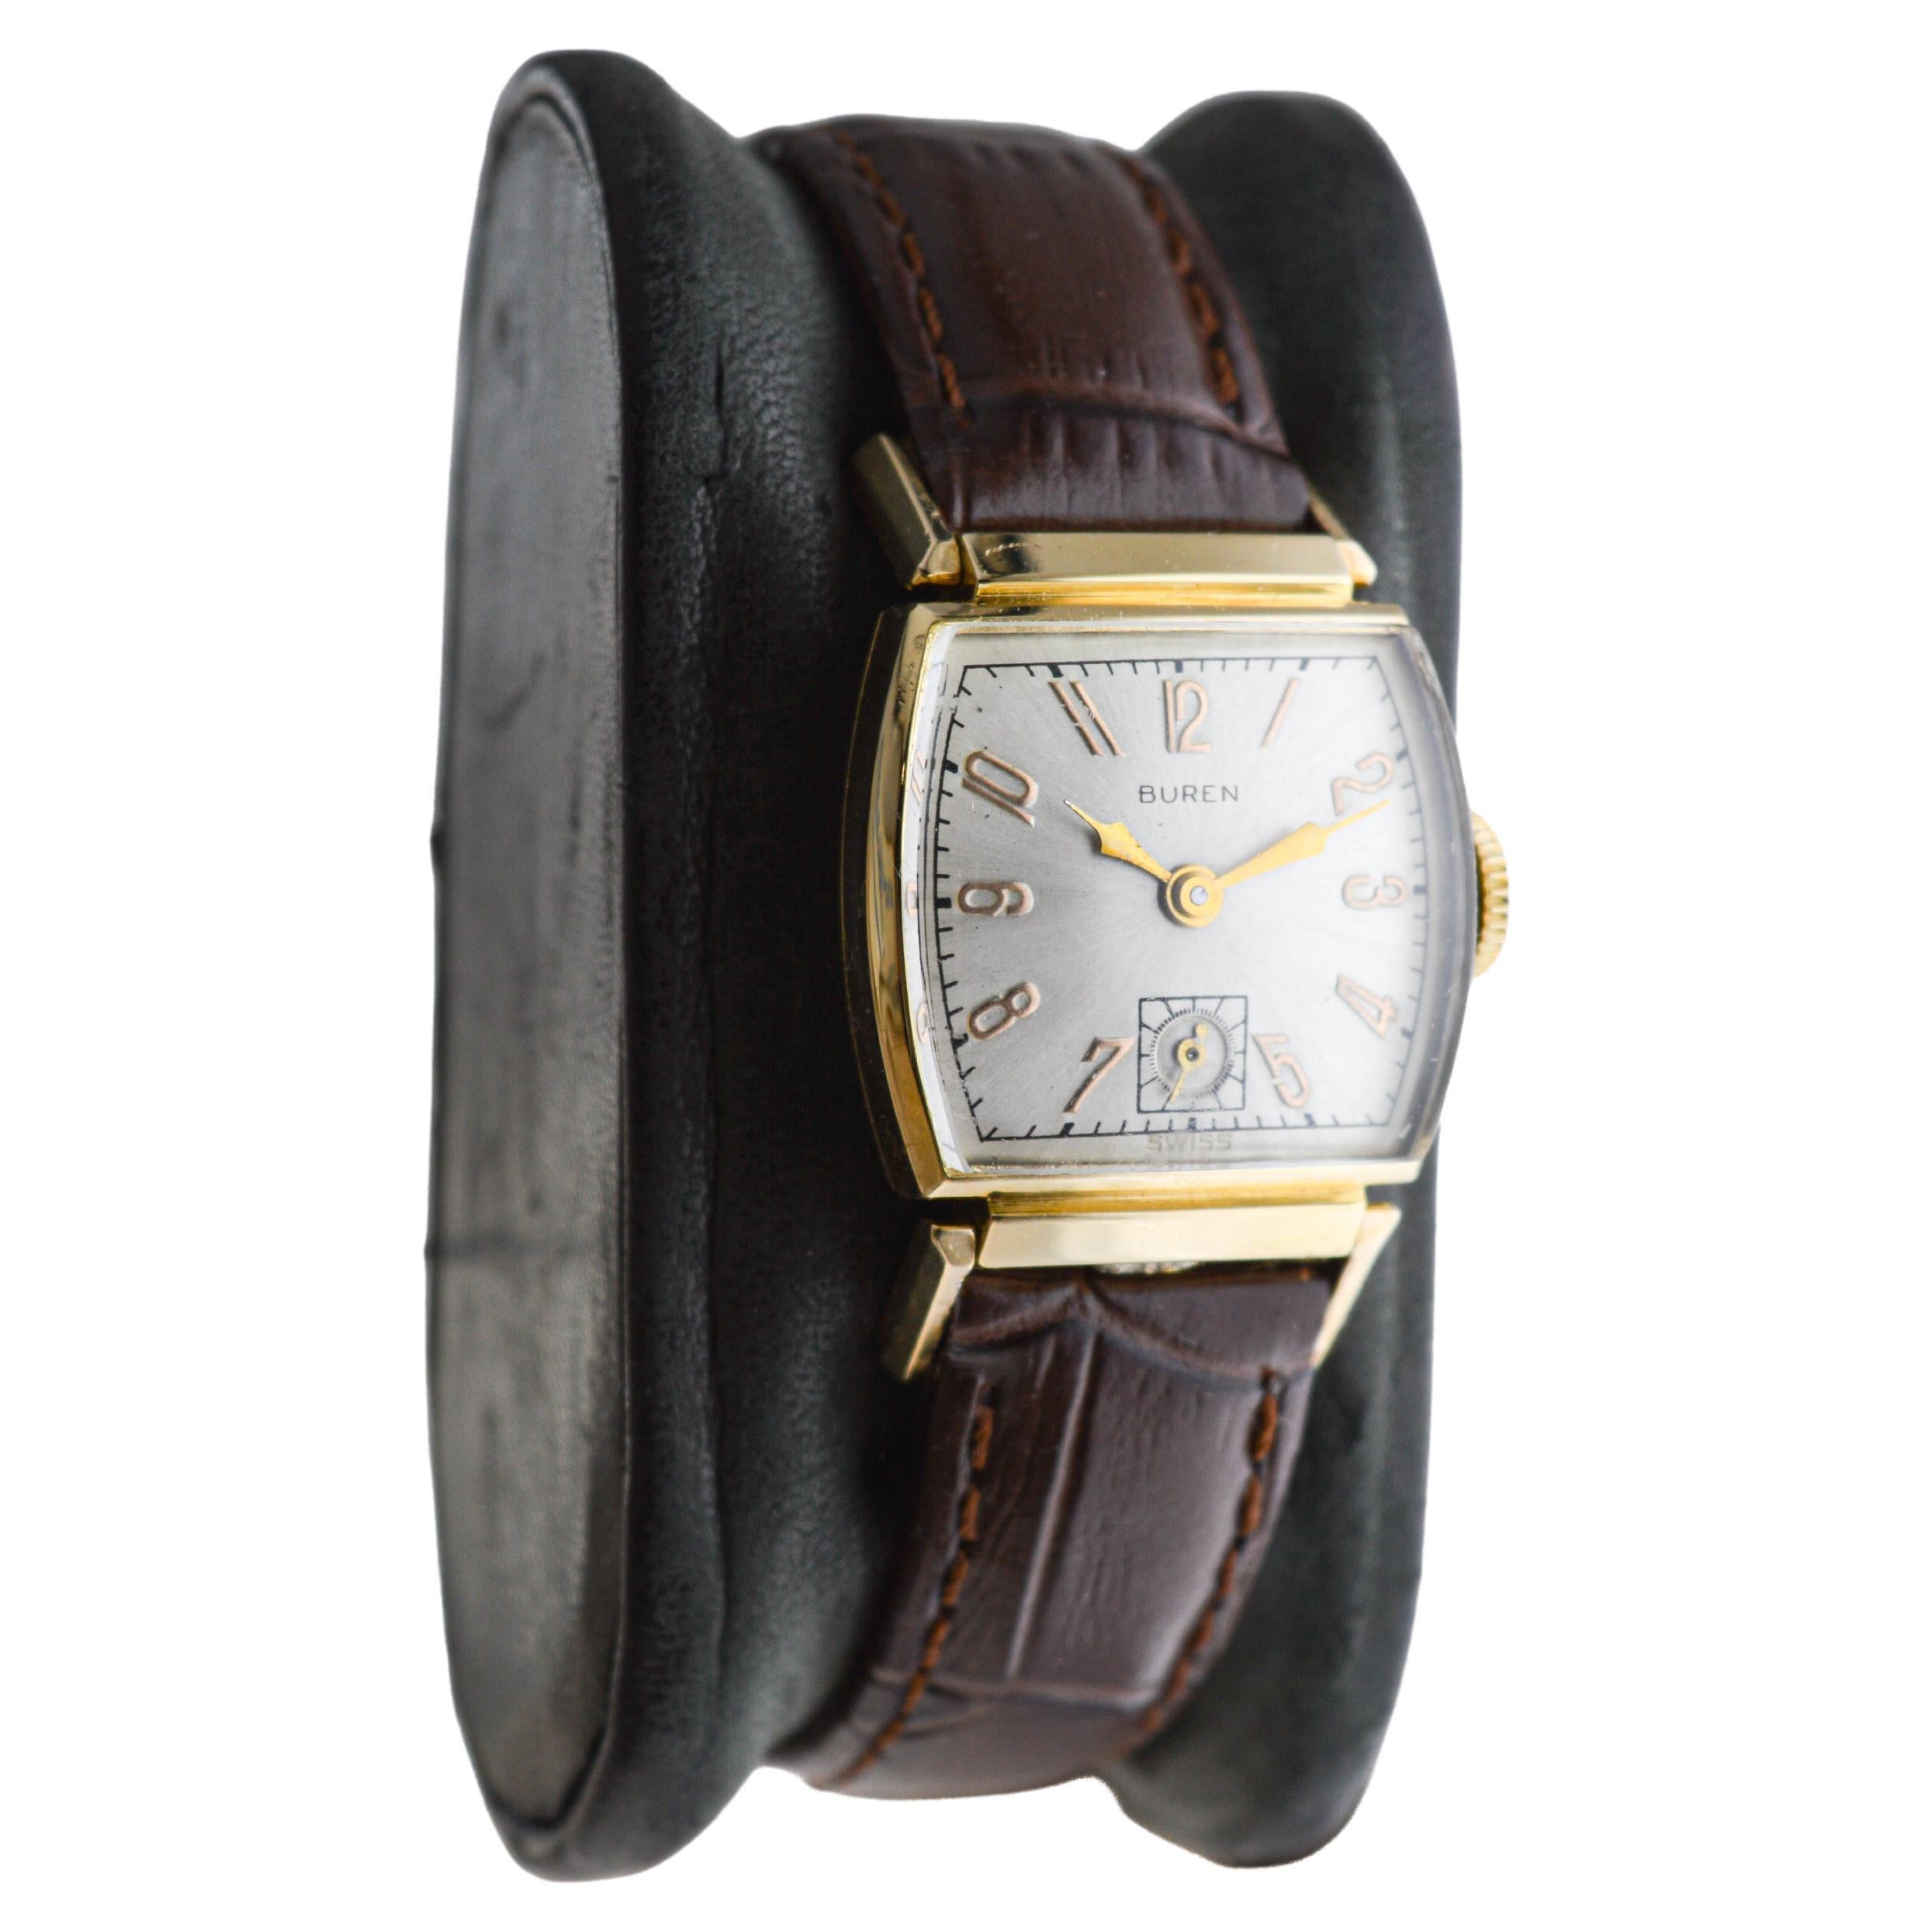 FACTORY / HOUSE: Buren Watch Company
STYLE / REFERENCE: Art Deco
METAL / MATERIAL: 14Kt Gold Filled
CIRCA / YEAR: 1940's
DIMENSIONS / SIZE: 42mm Length X 23mm Diameter
MOVEMENT / CALIBER: Manual Winding / 17 Jewels / Caliber 
DIAL / HANDS: Silvered